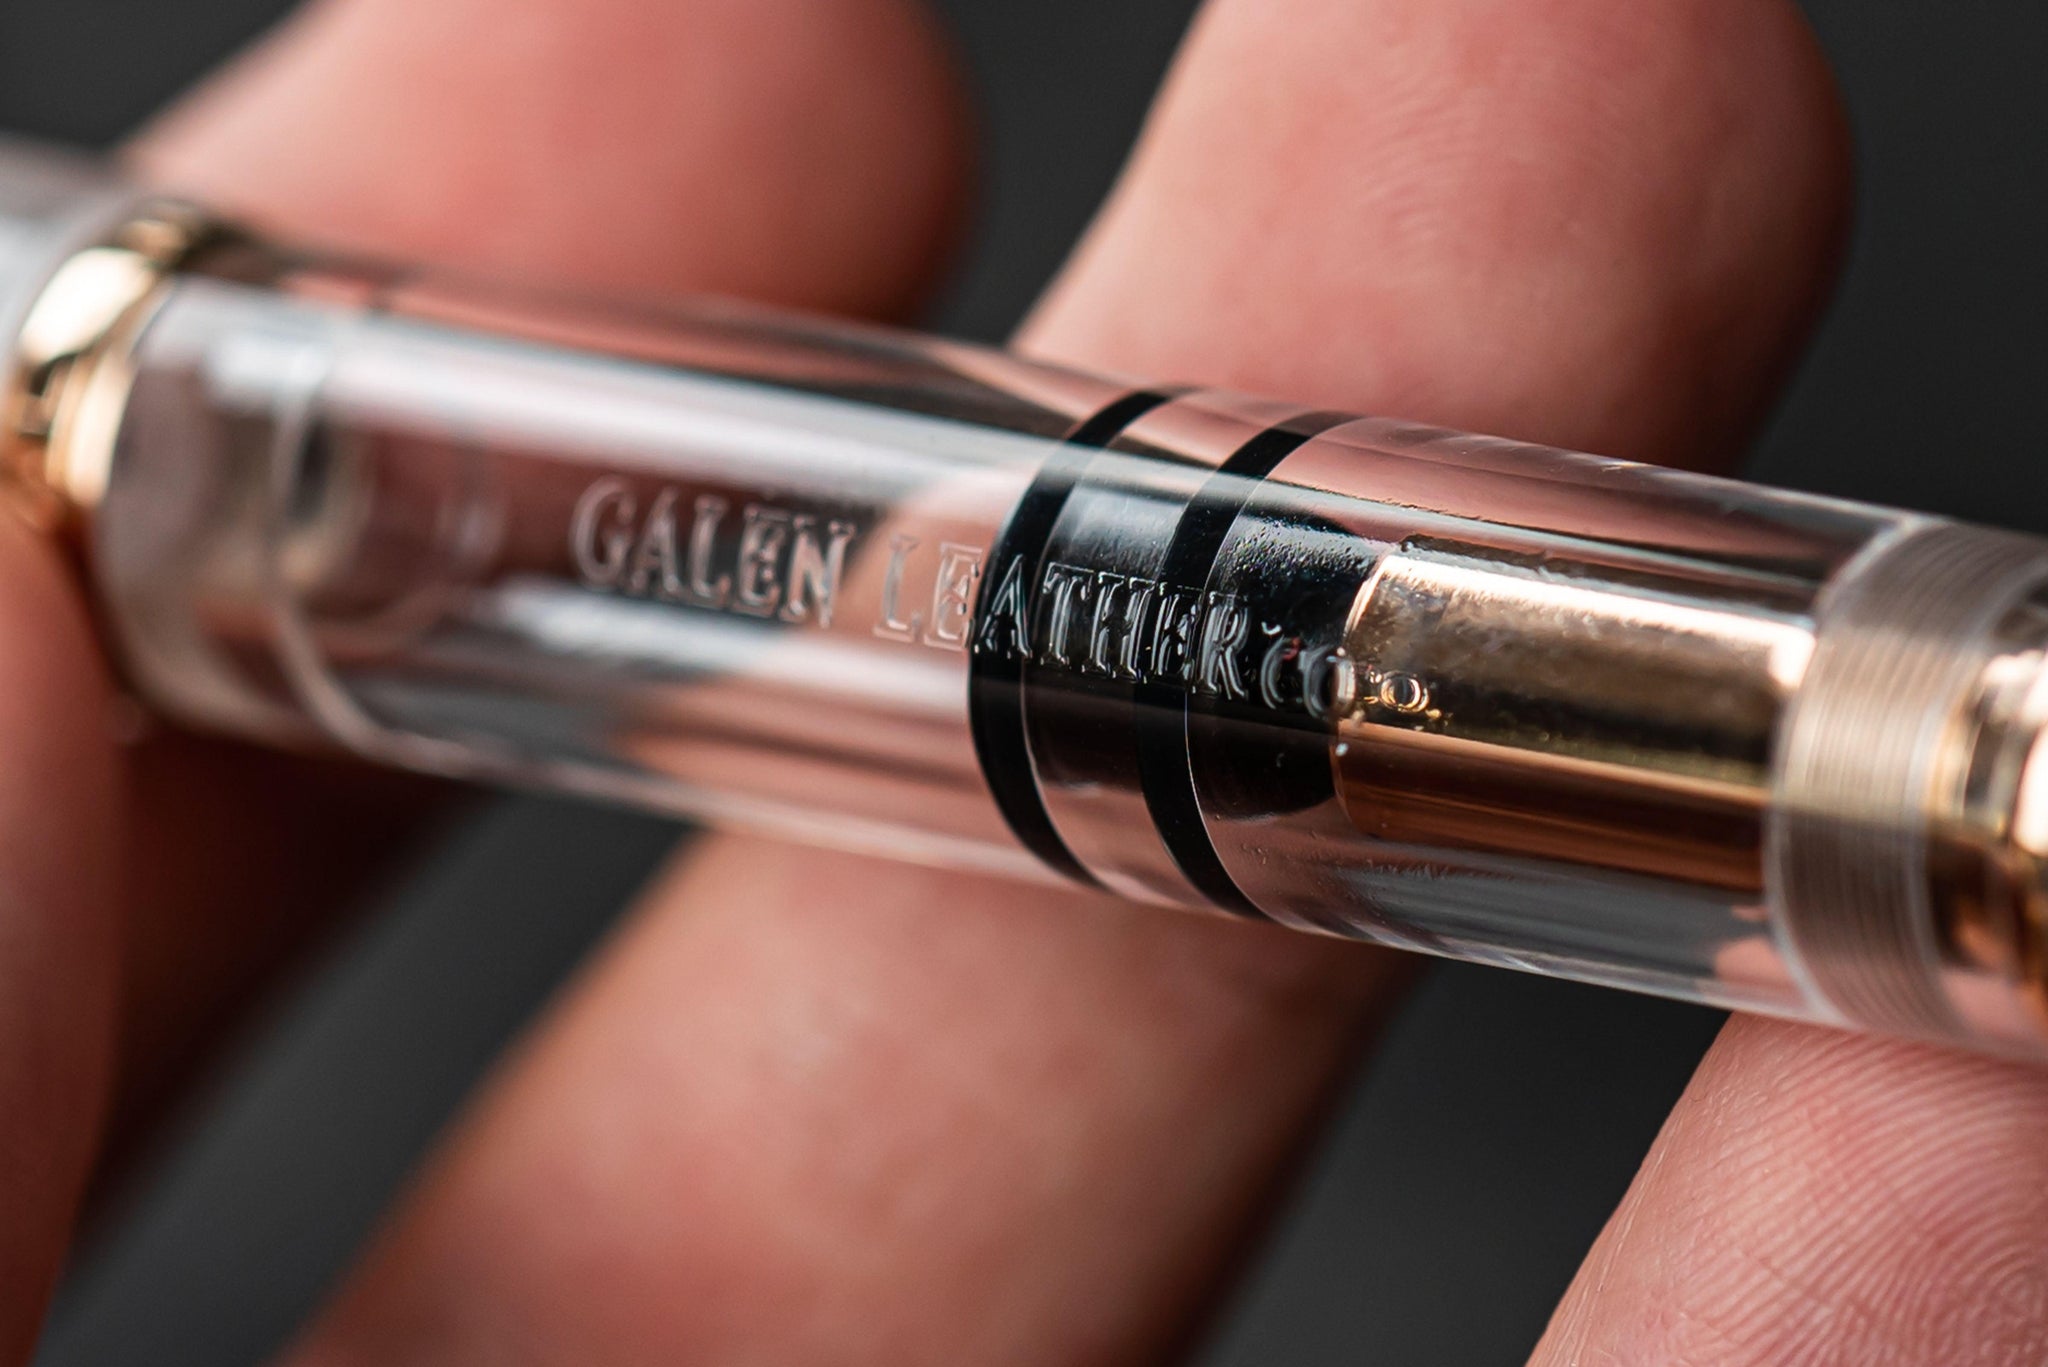 Nahvalur x Galen Leather Rose Gold Demonstrator & Vinta Inks The  Maiden/Lakambini - A Double Review — The Pen Addict